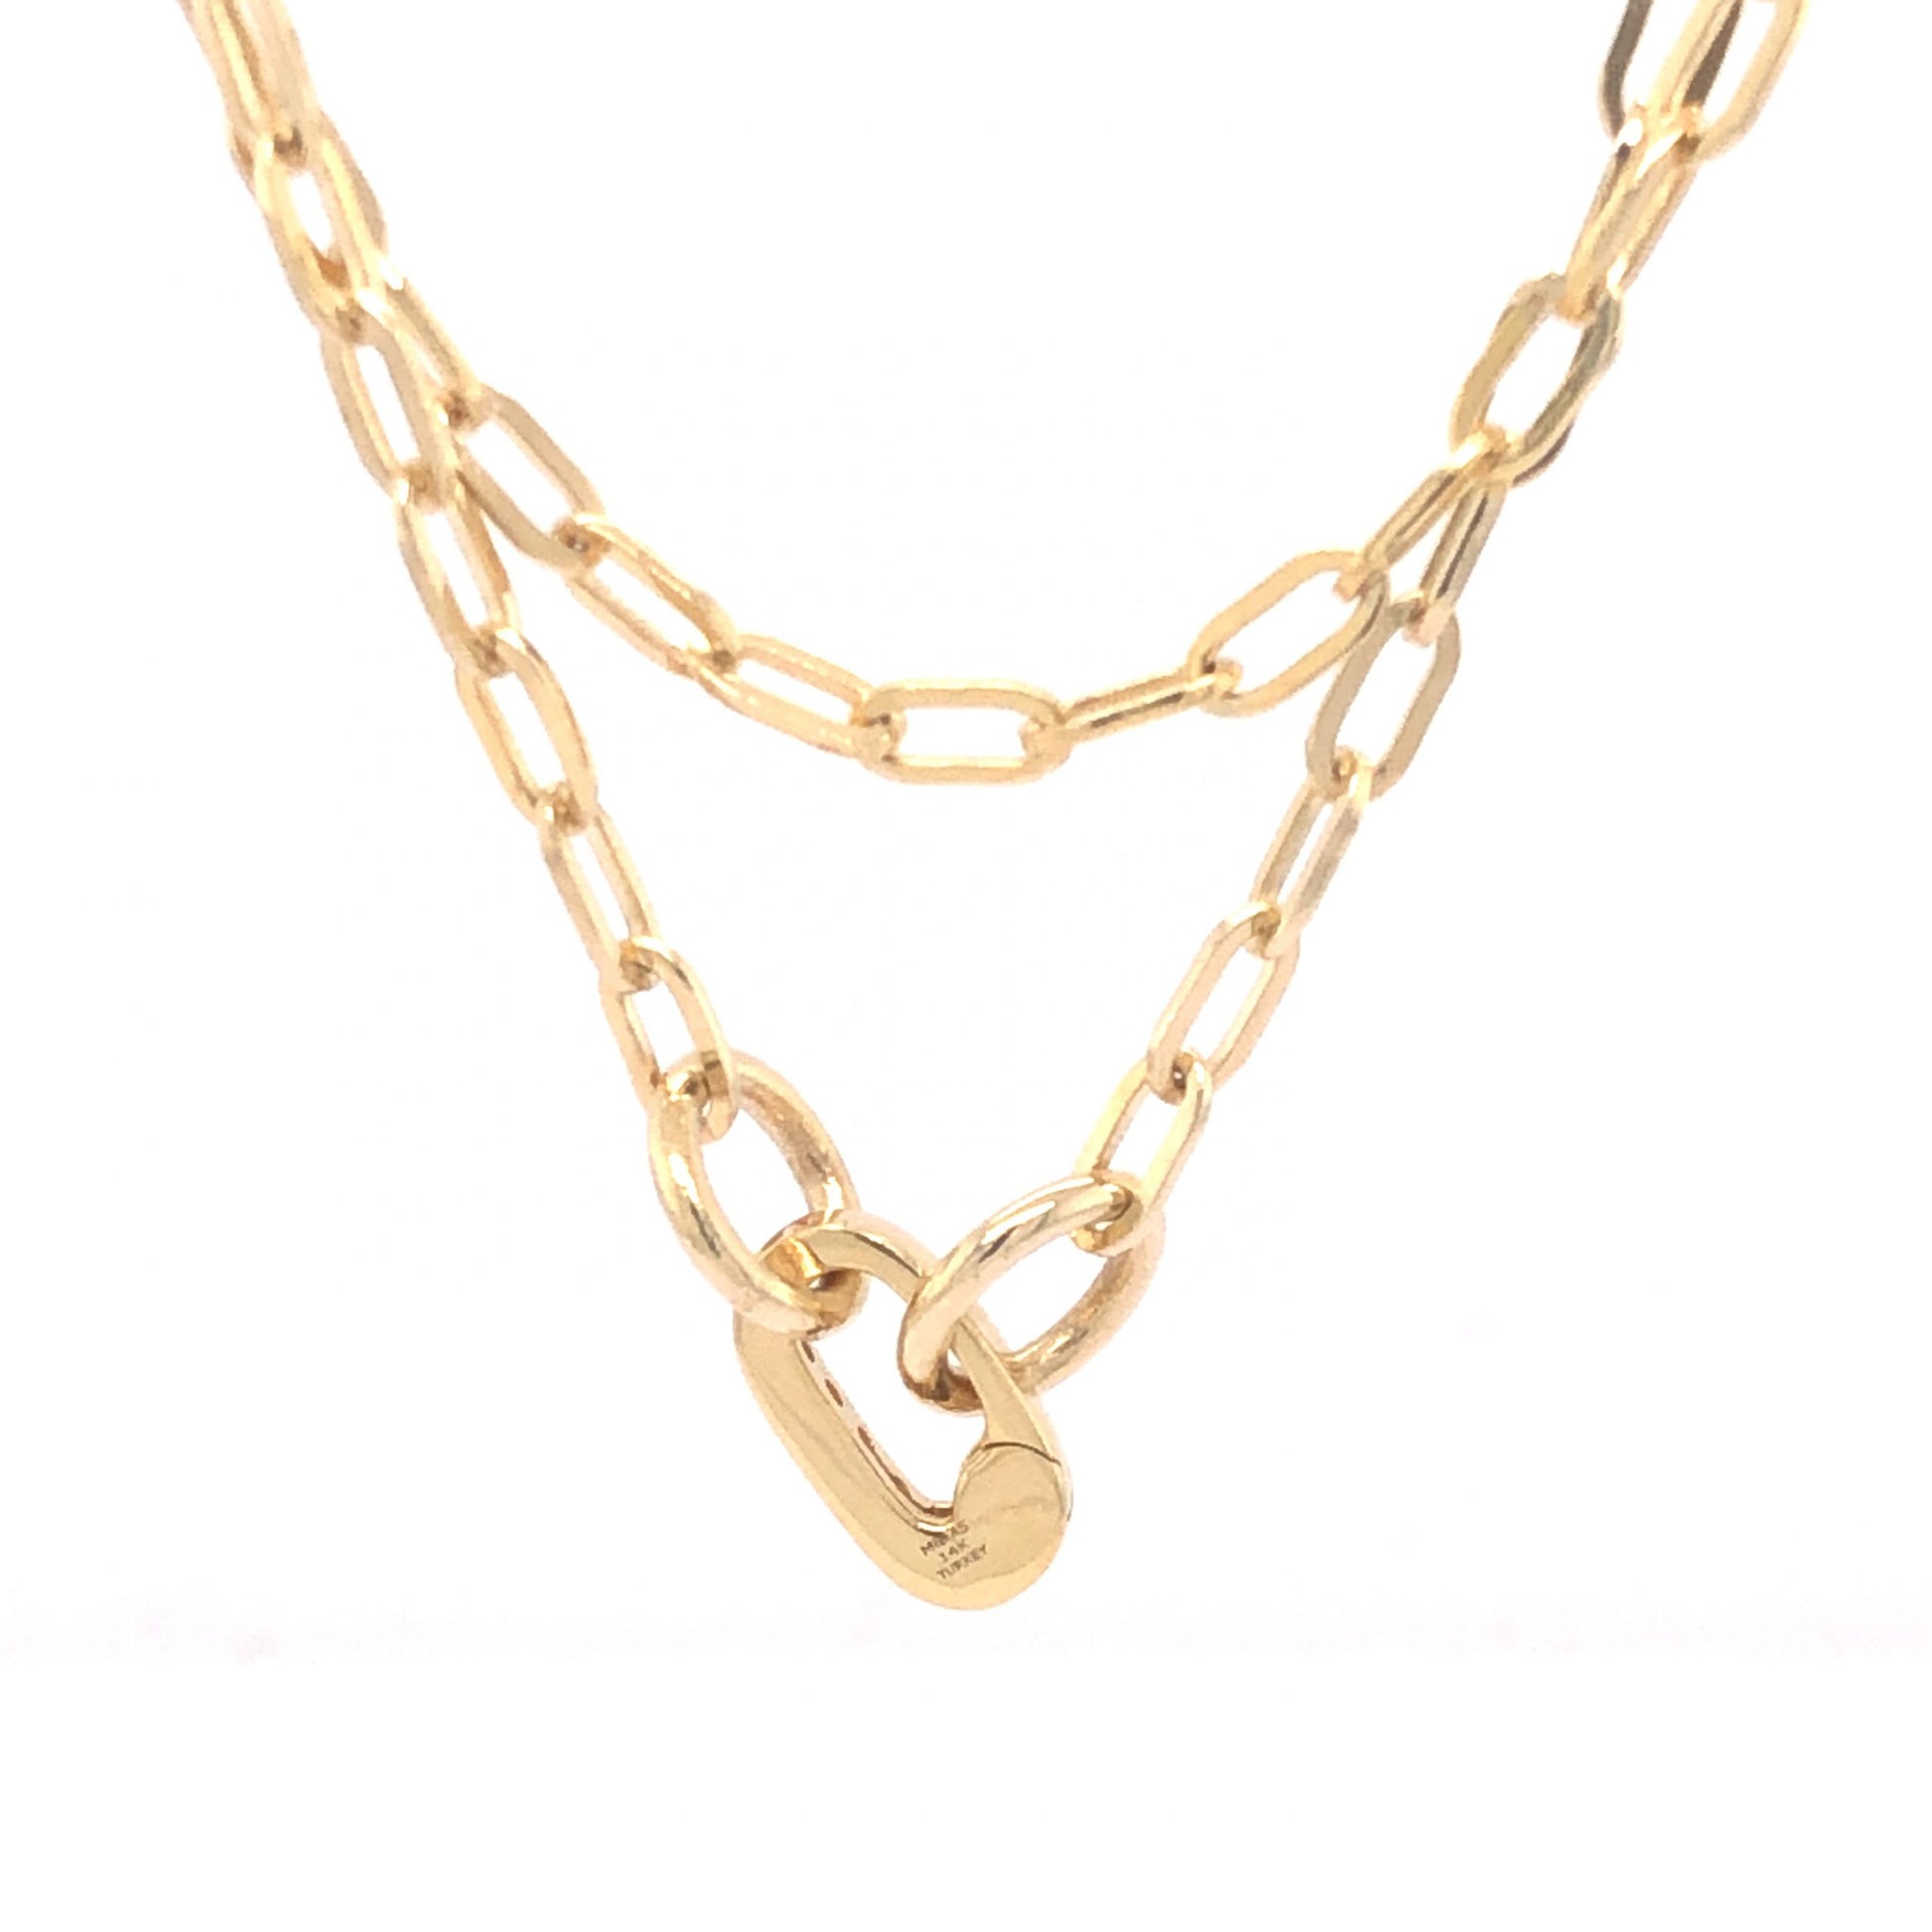 .08 Diamond Clasp Necklace in 14K Yellow Gold